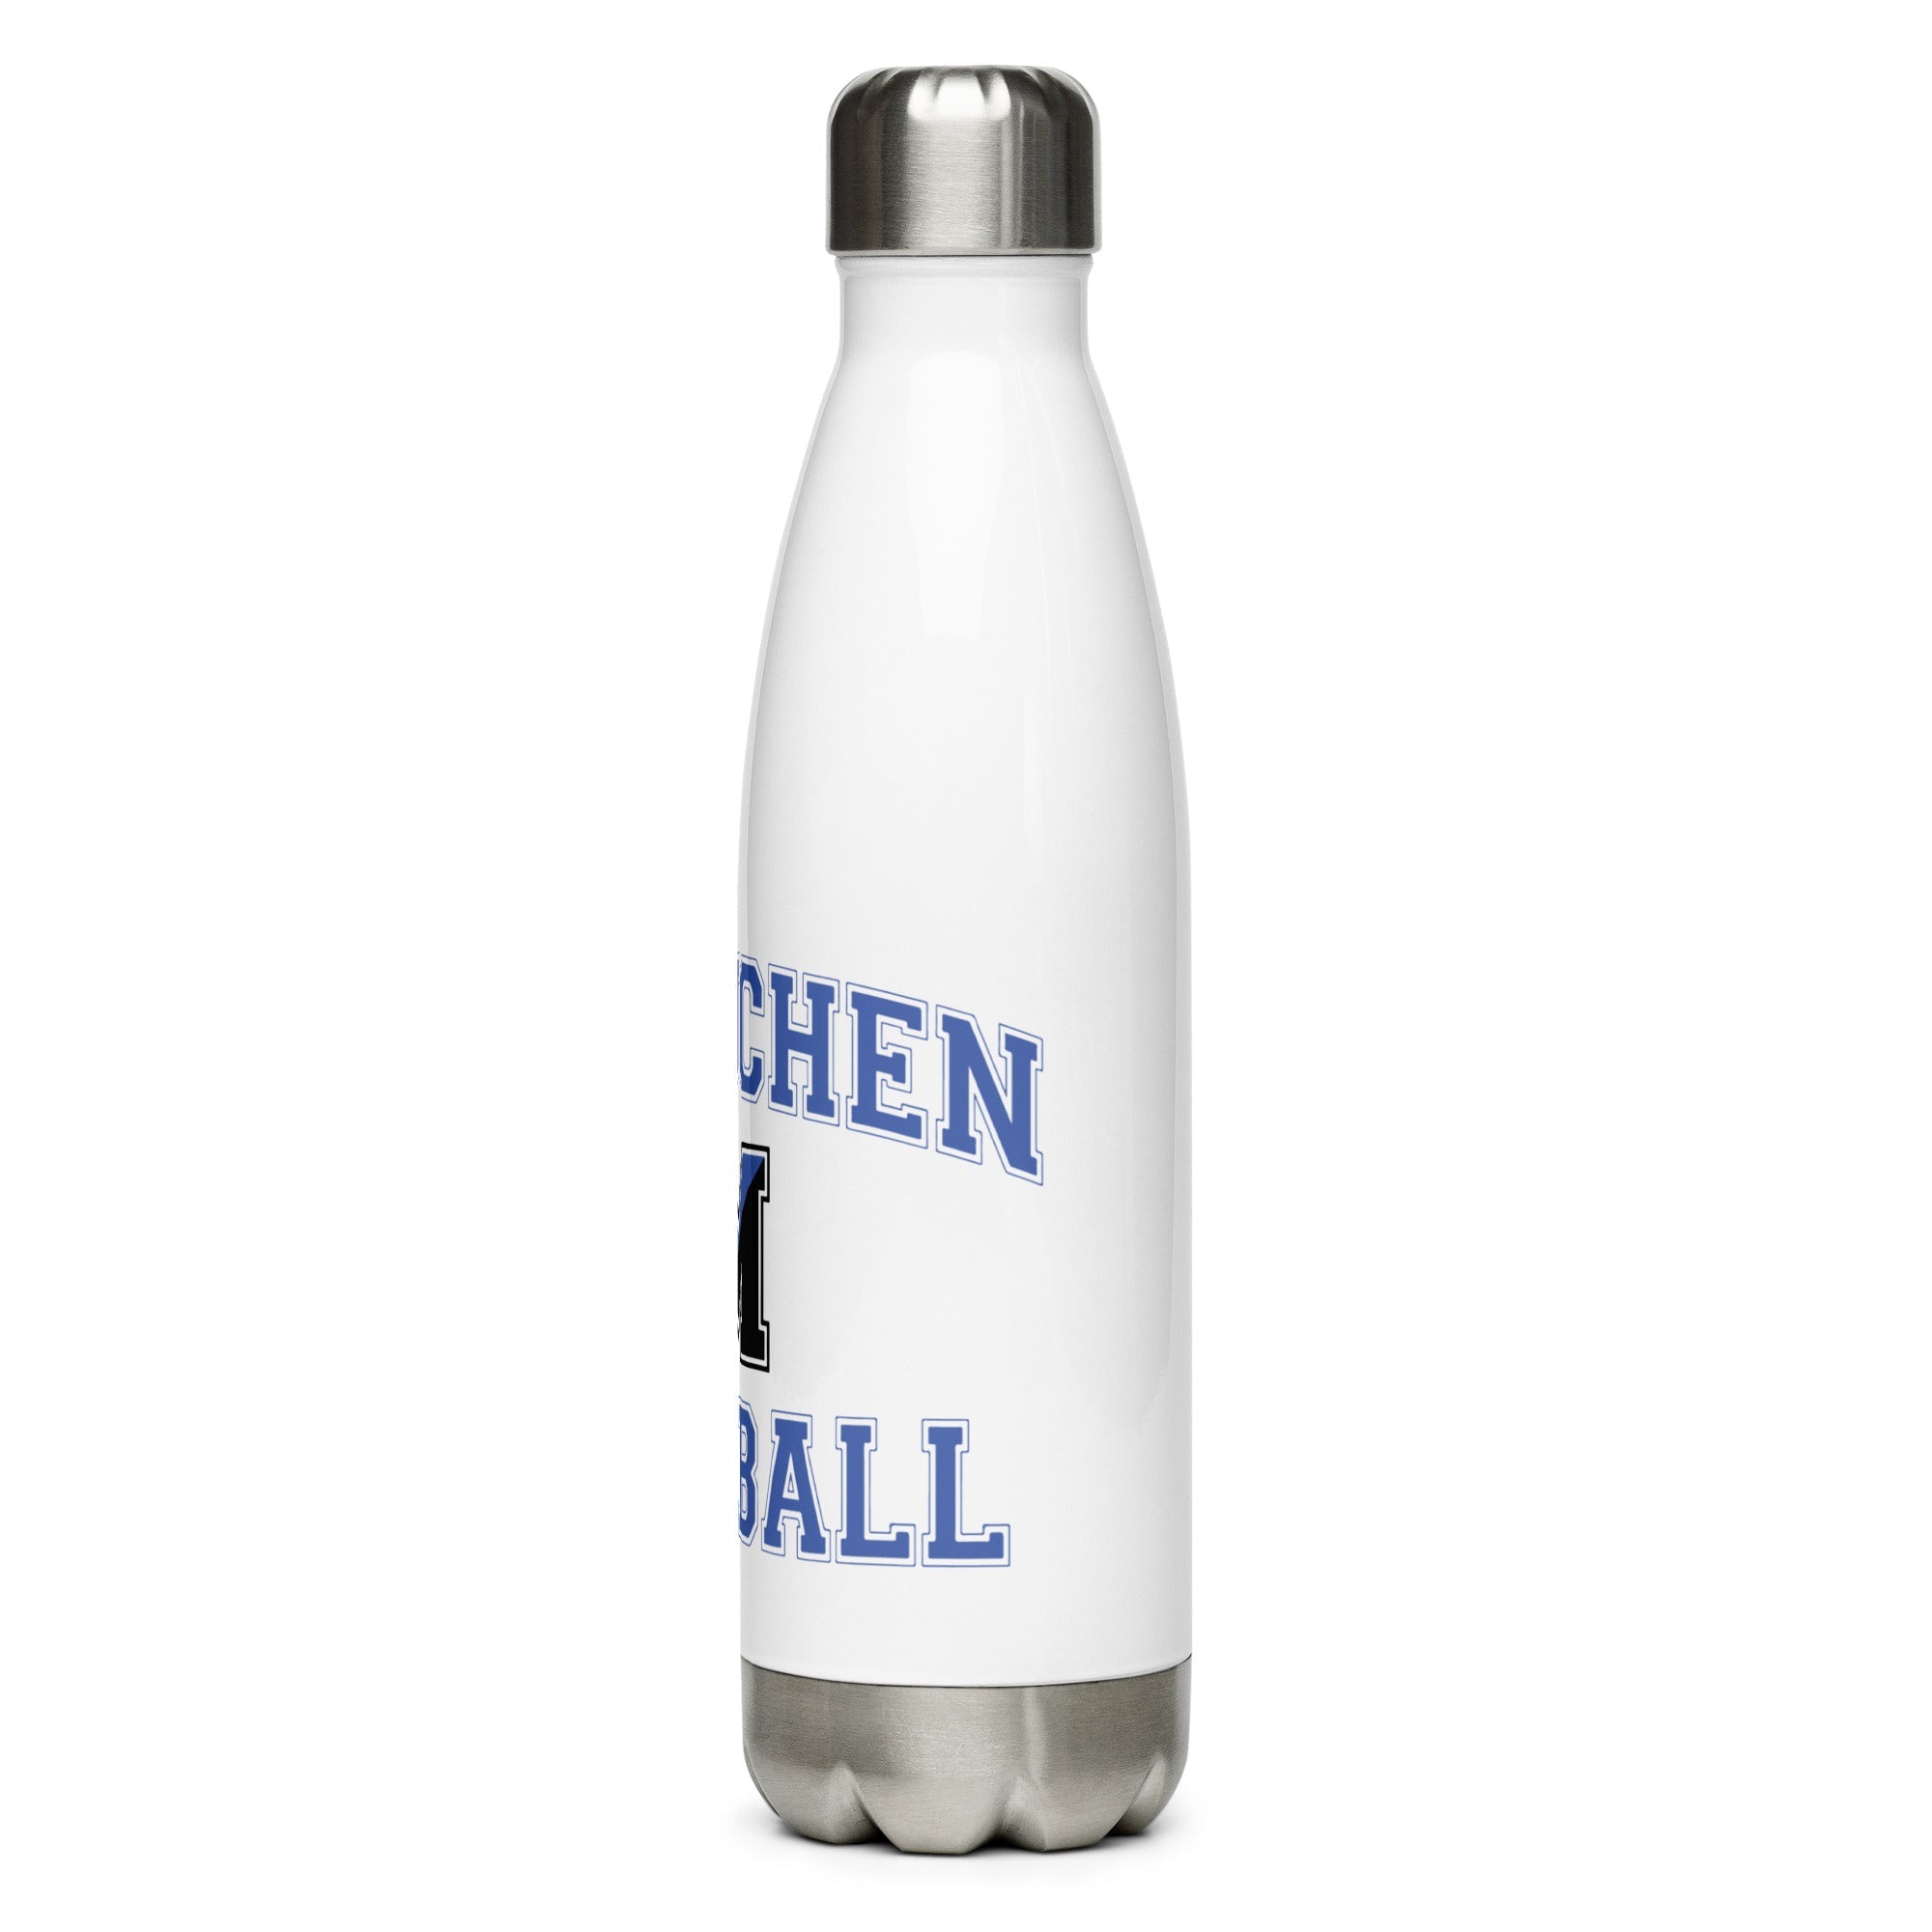 MB Stainless Steel Water Bottle